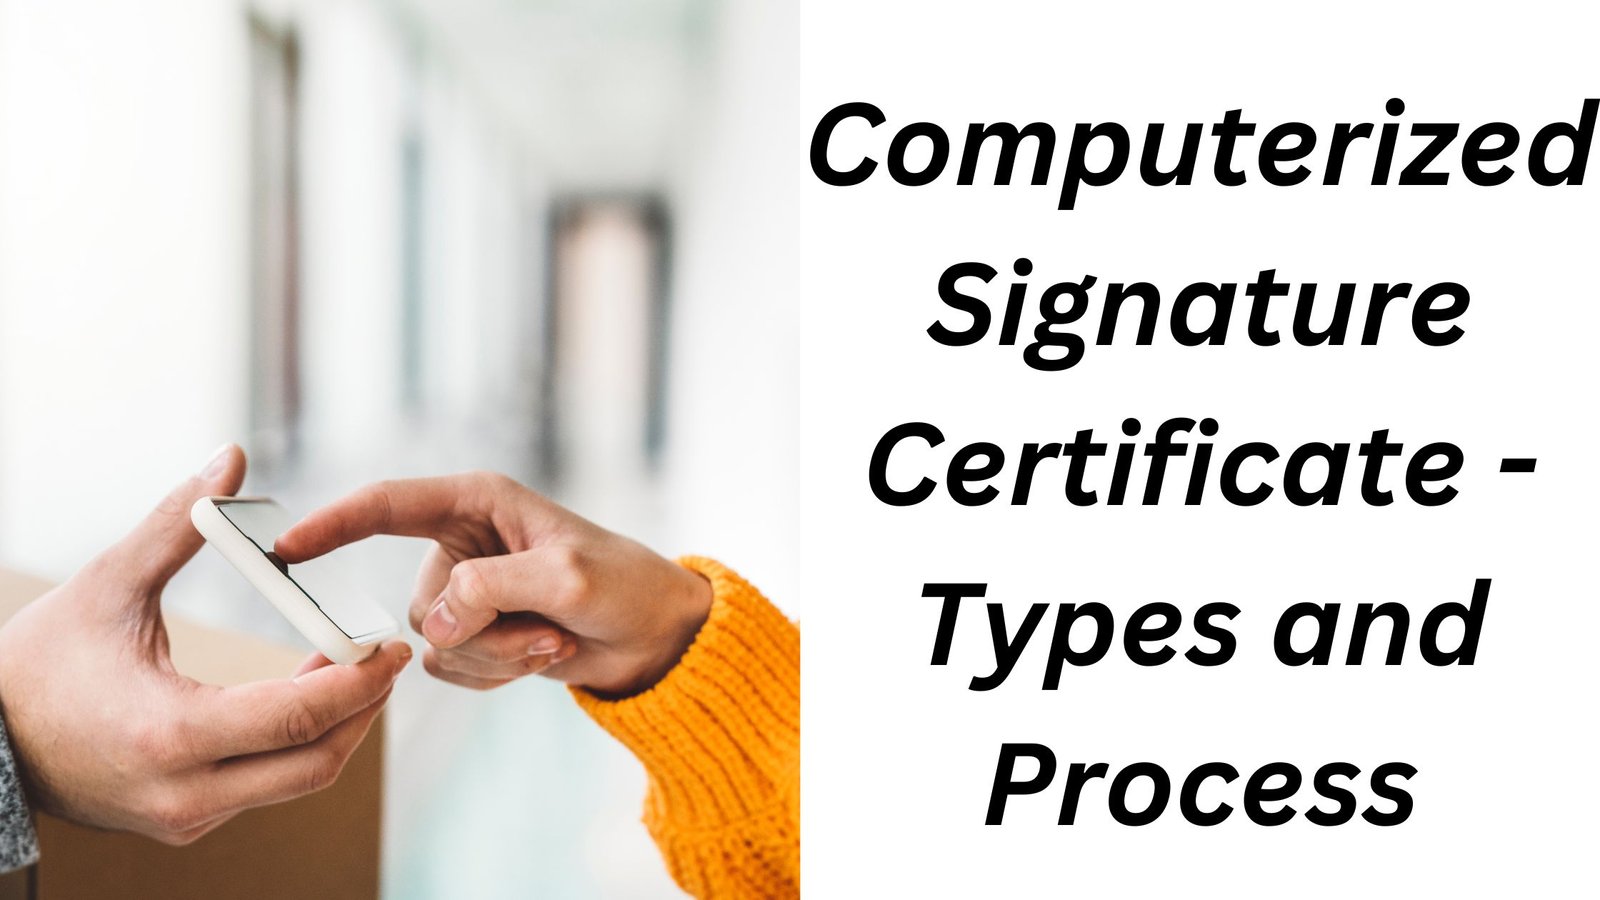 Computerized Signature Certificate – Types and Process